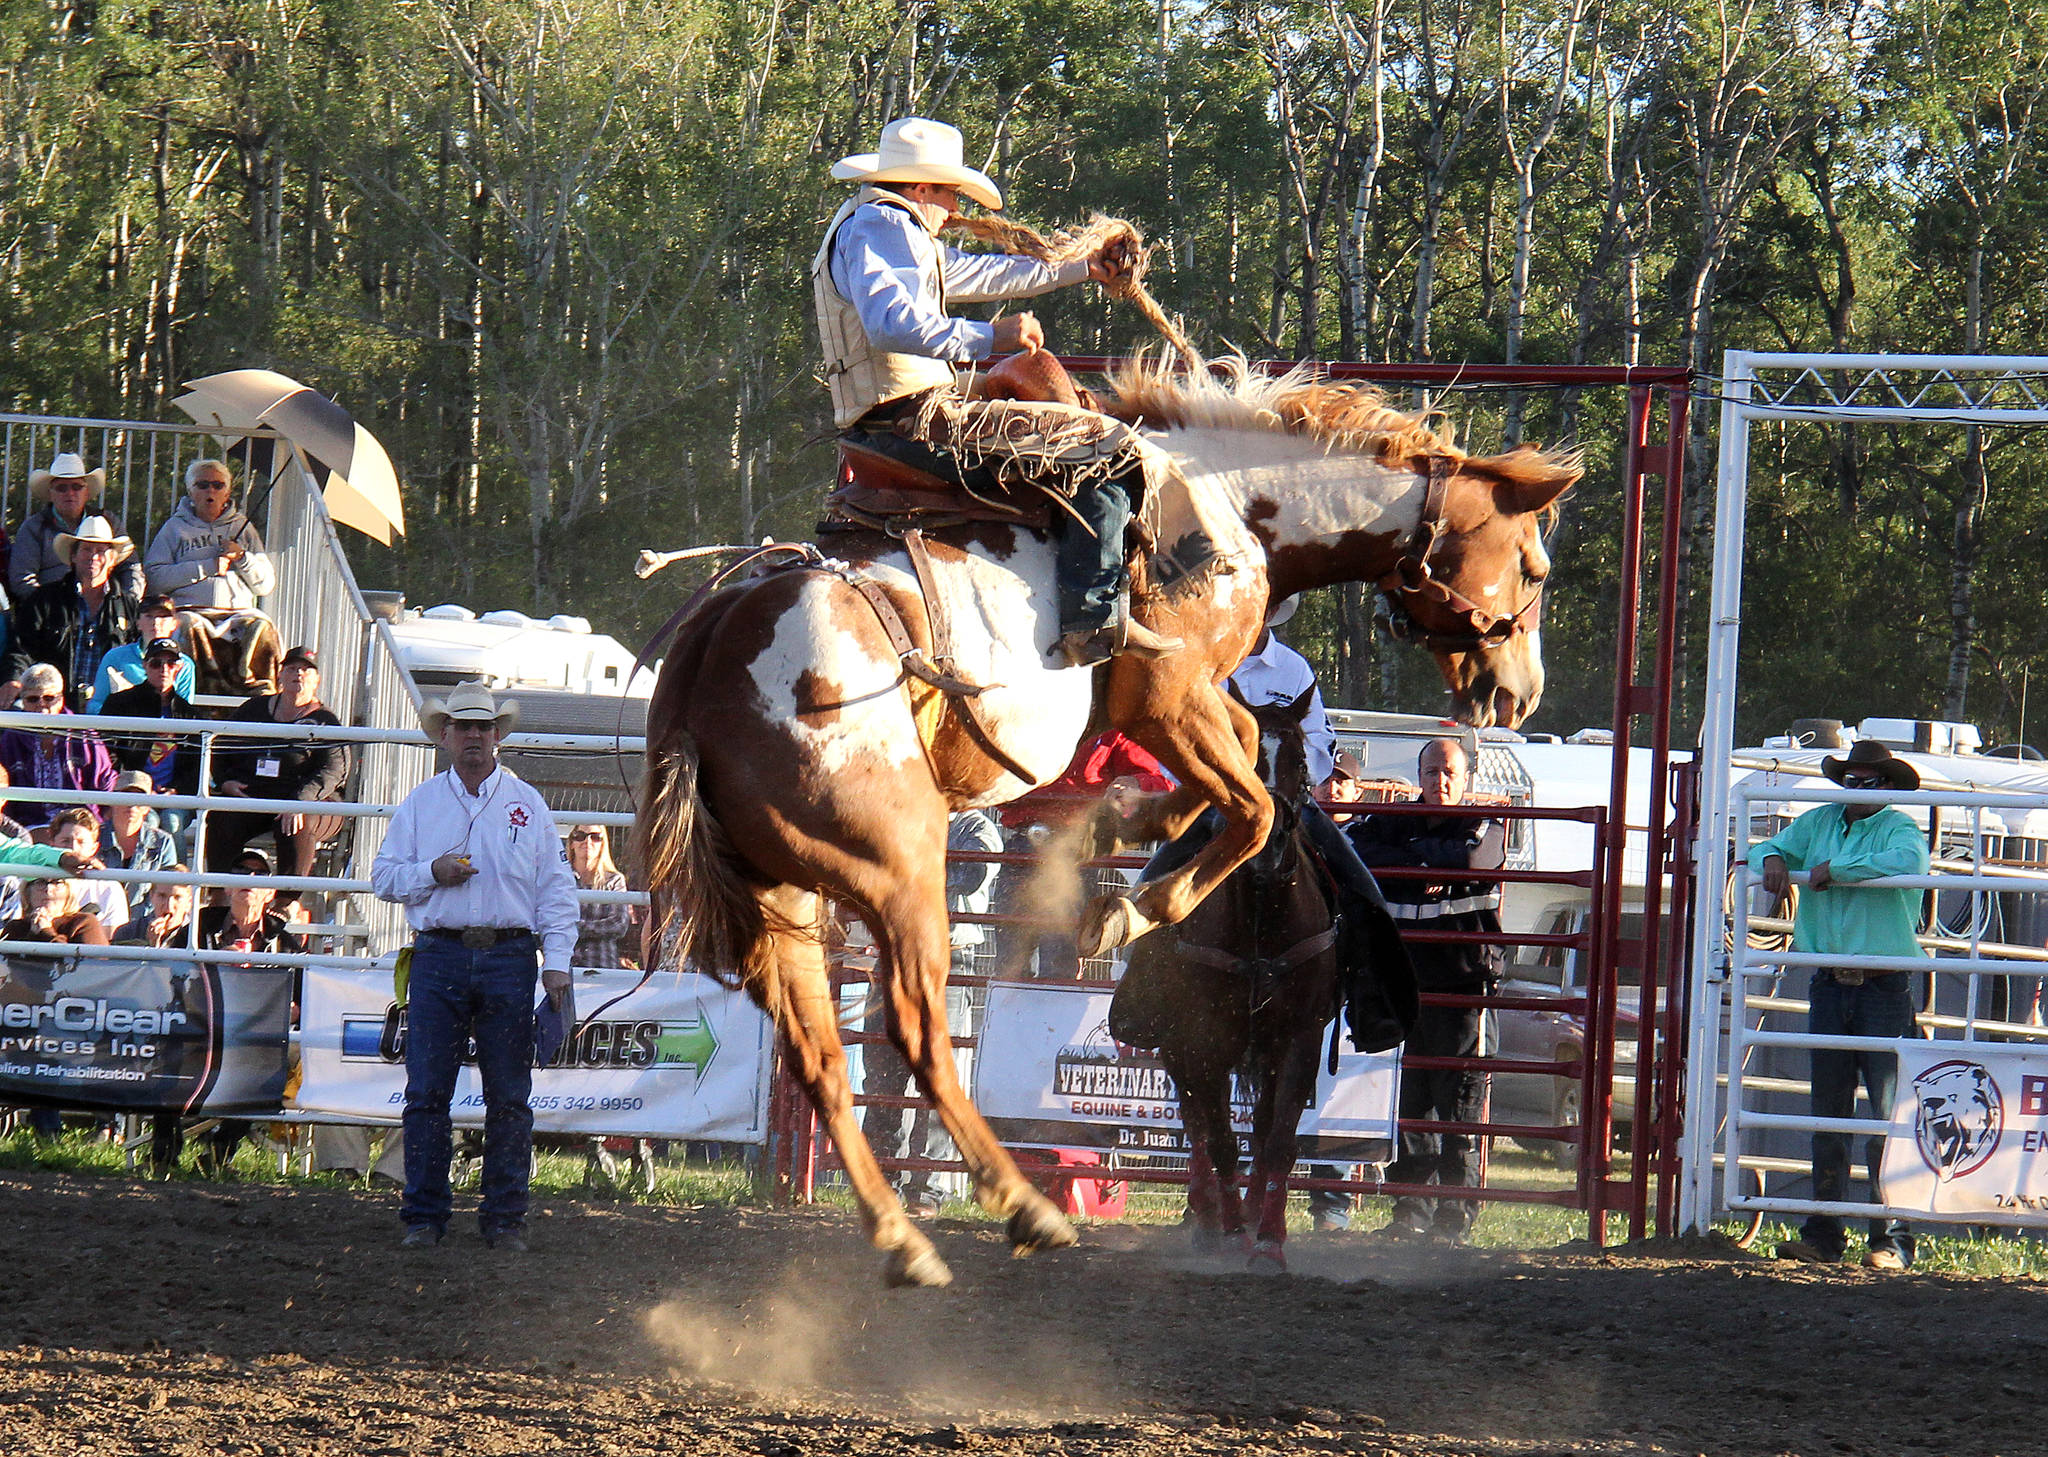 Dusty Hausauer tightens his grip as his horse works to buck him off during the saddle bronc event.